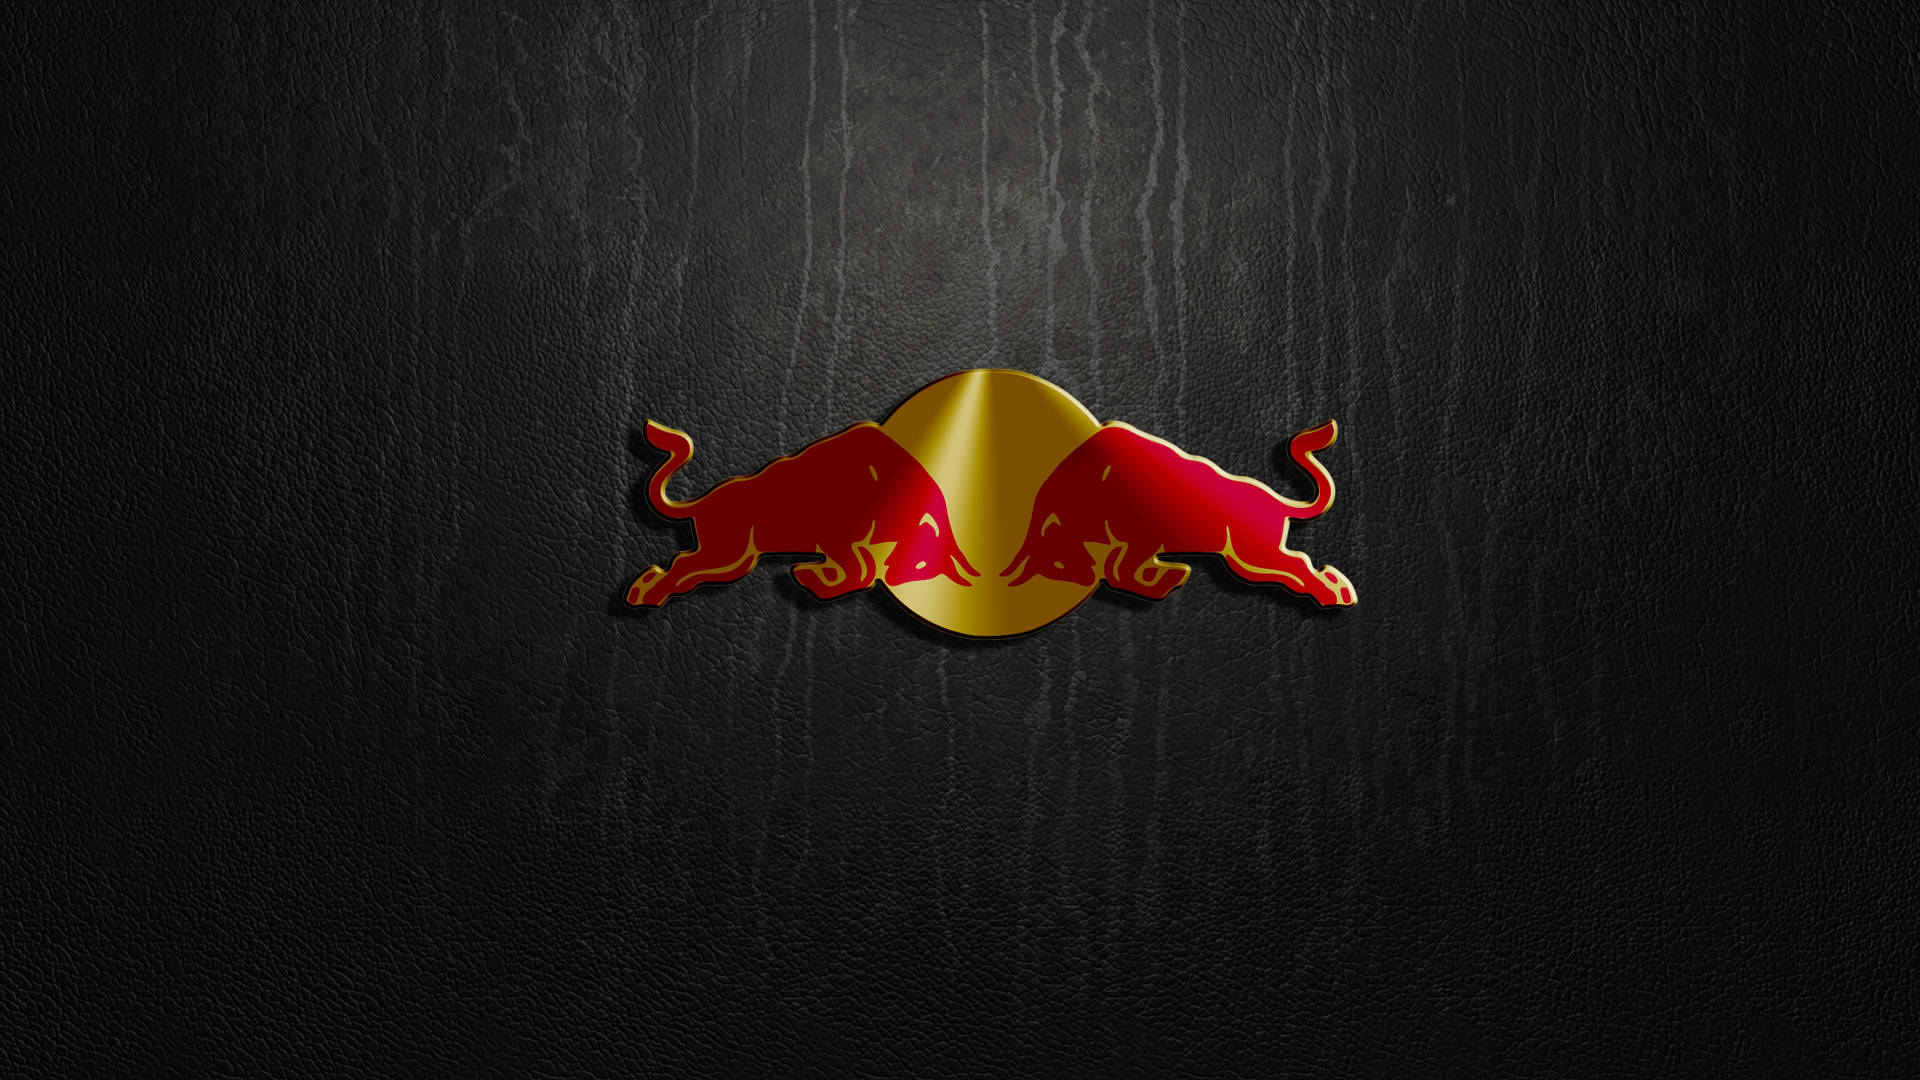 Red Bull F1 Pictures Wallpaper